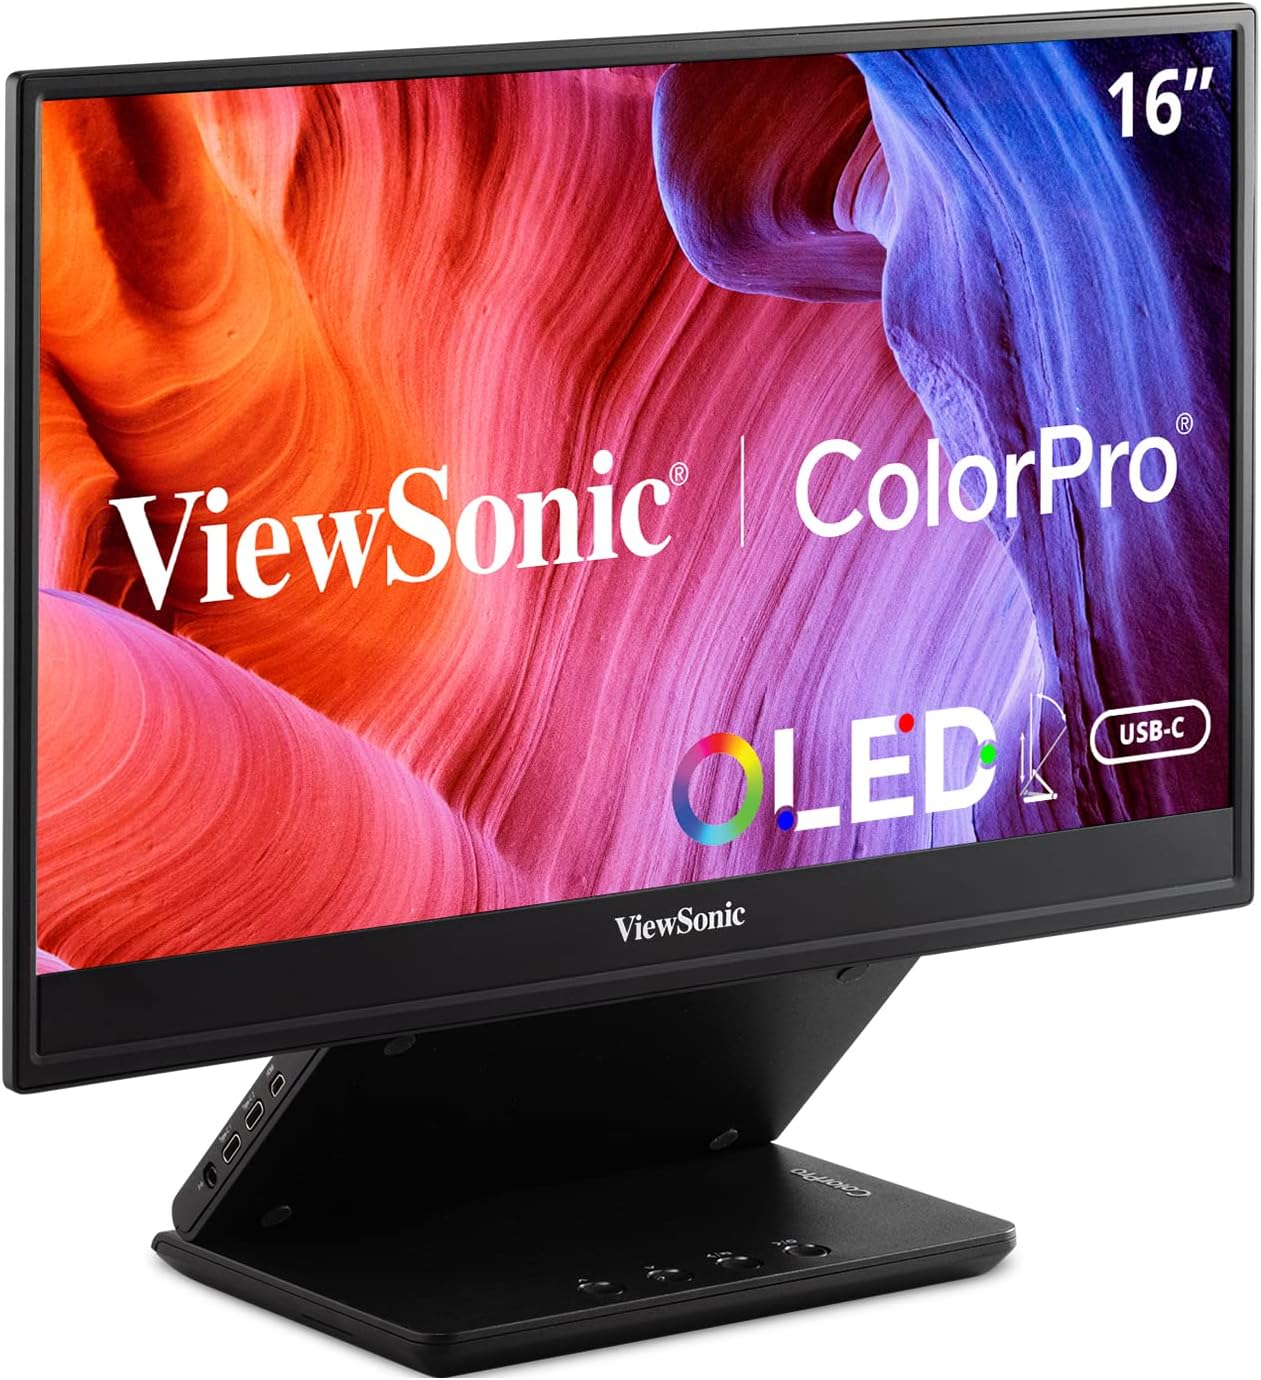 ViewSonic VP16-OLED 15.6 Inch 1080p Portable OLED Monitor $320